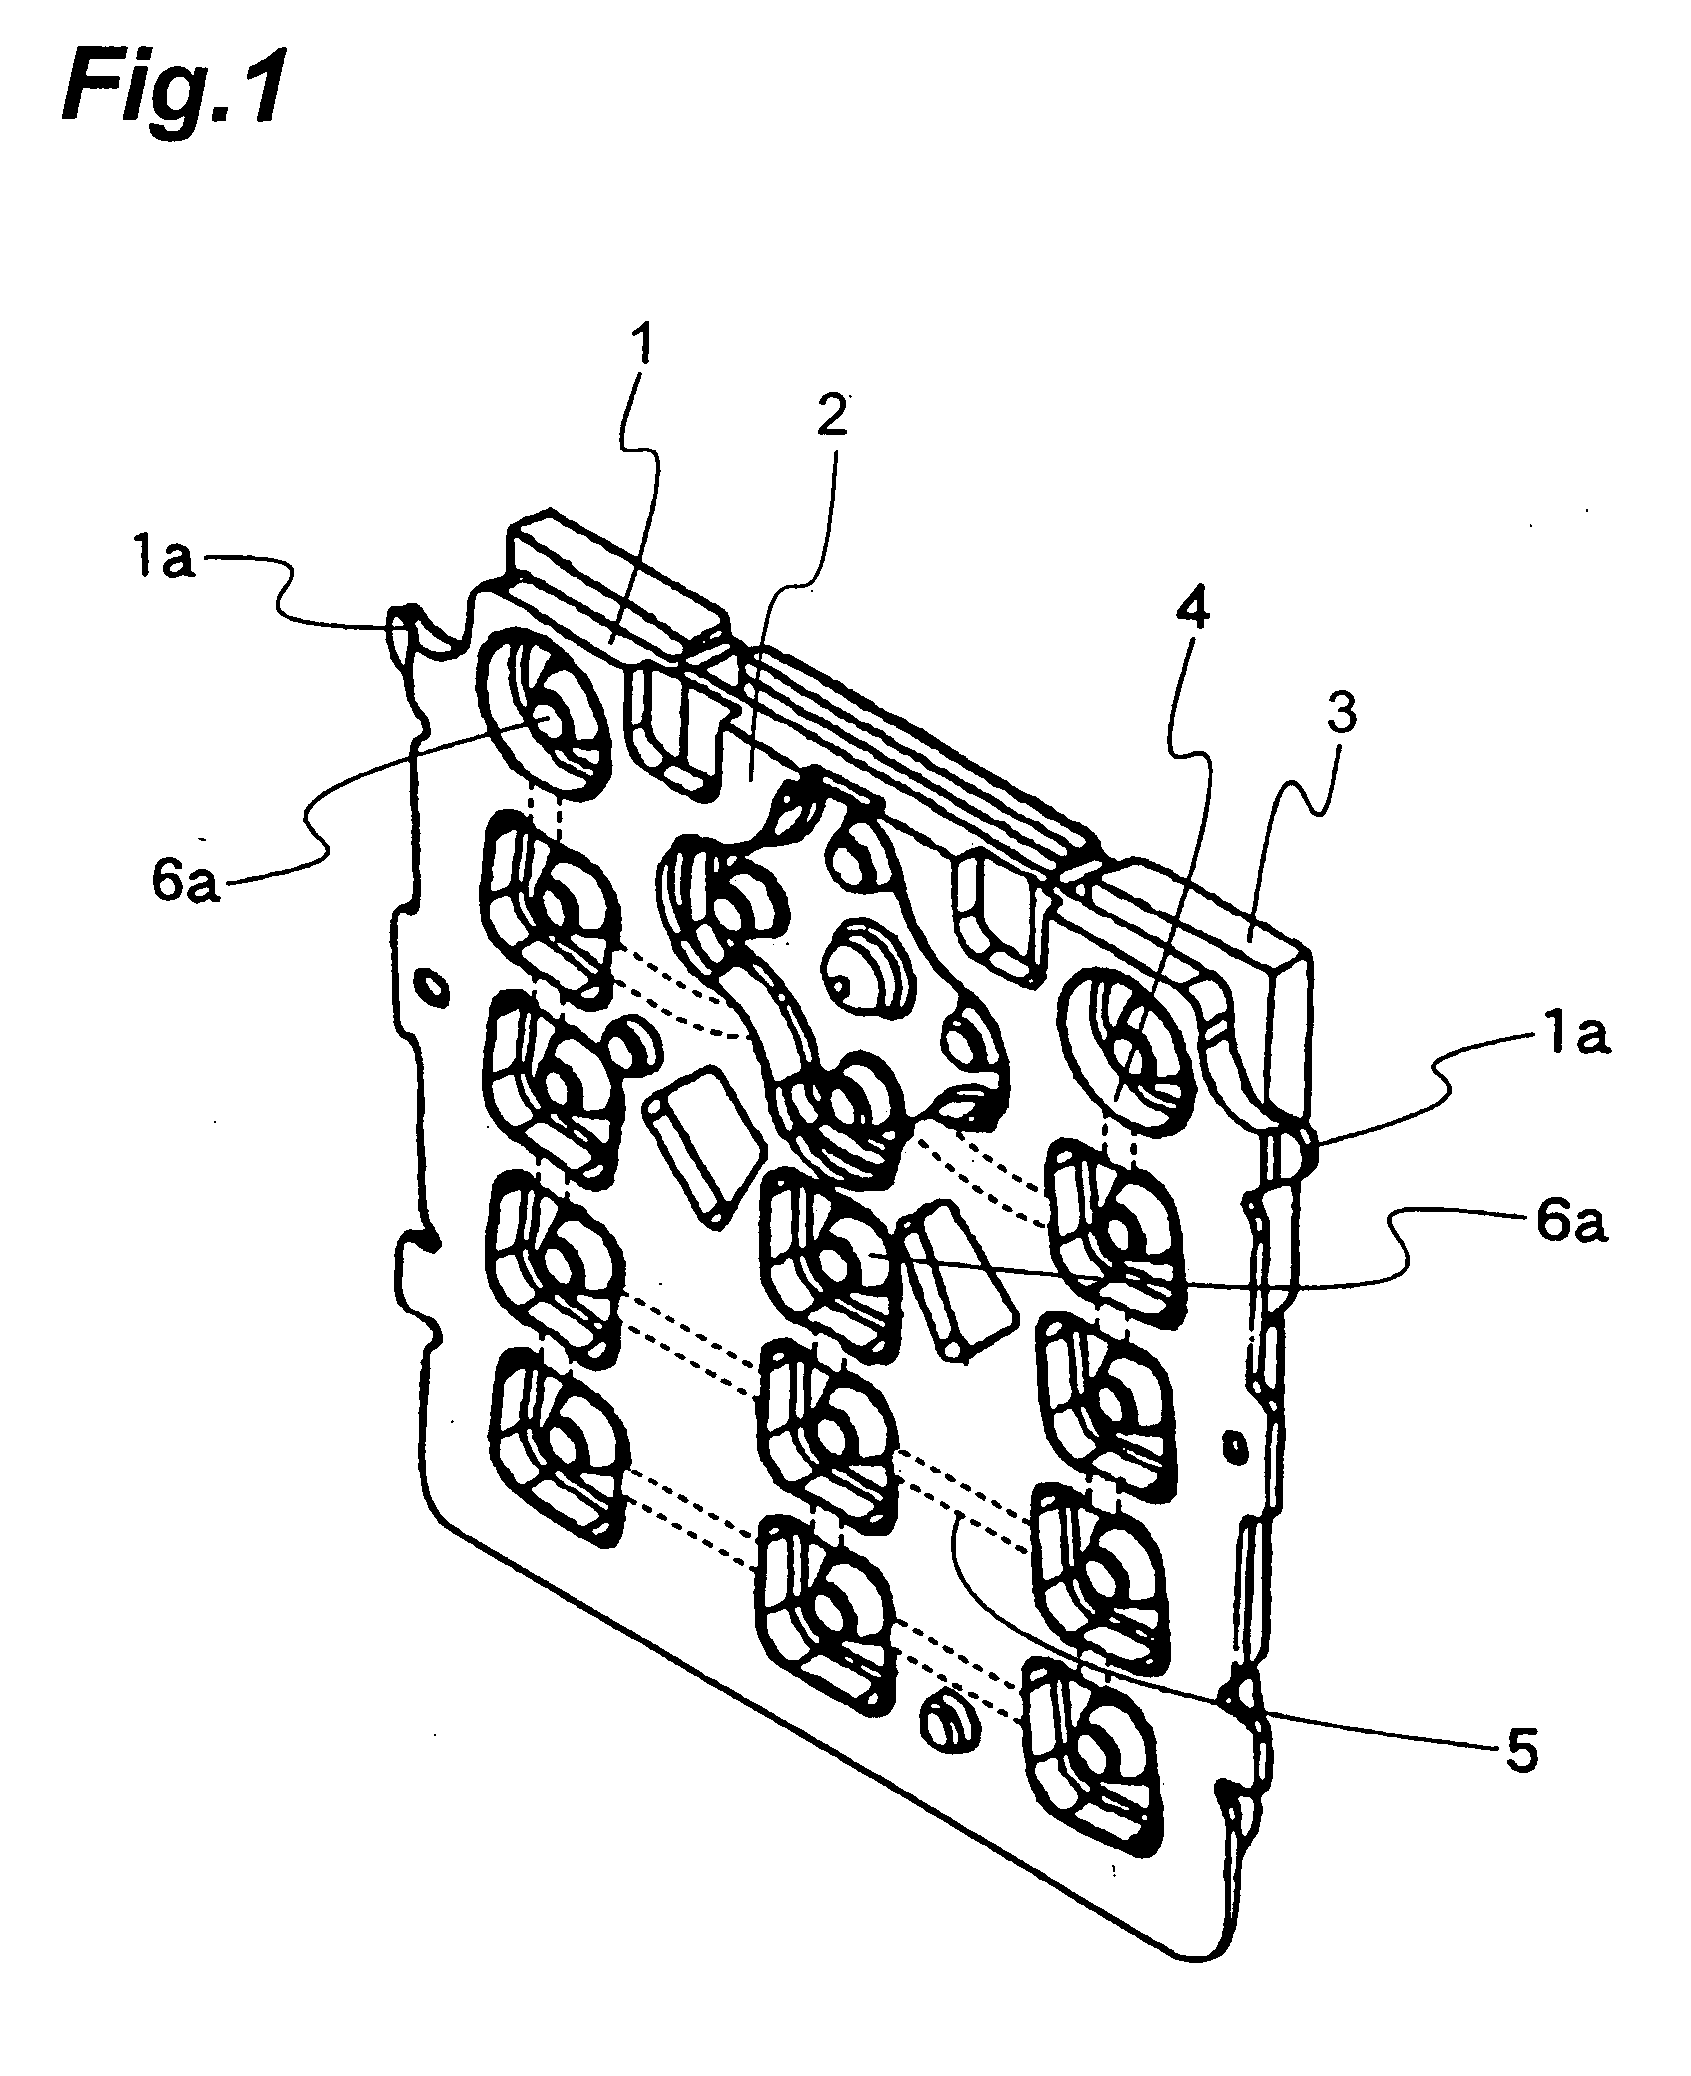 Cover Member For Push-Button Switch And Method Of Manufacturing The Same